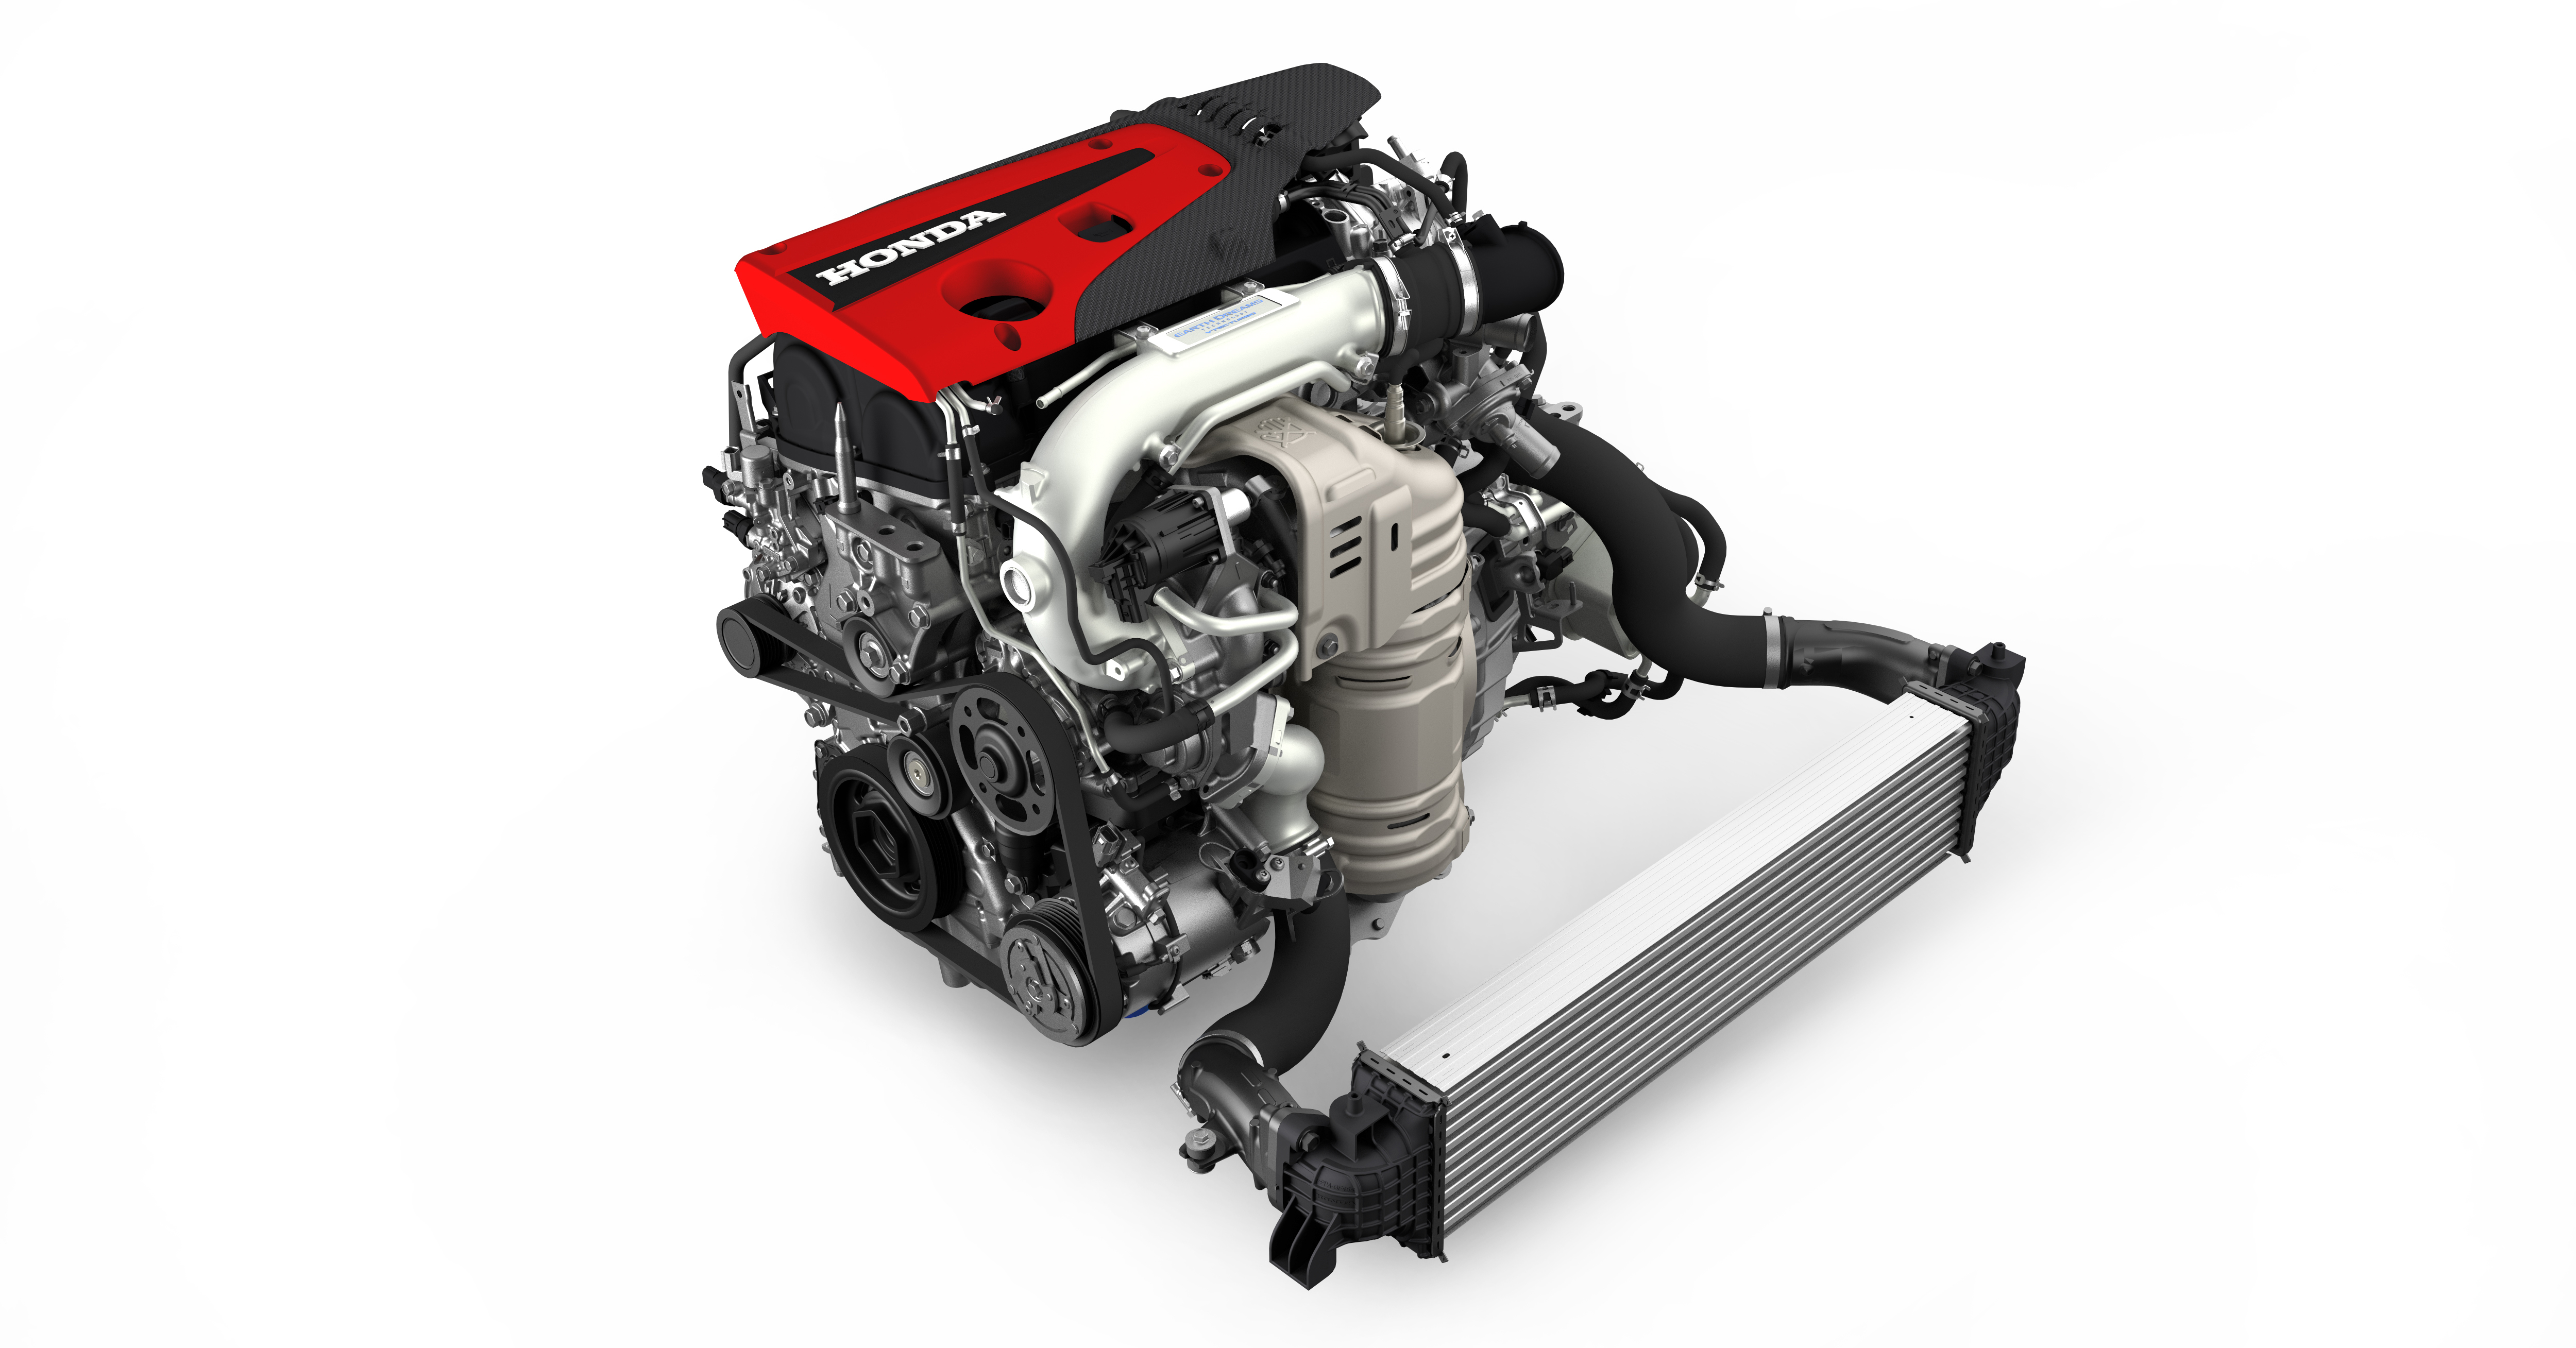 Honda announces Civic Type R crate engine purchase programme along with